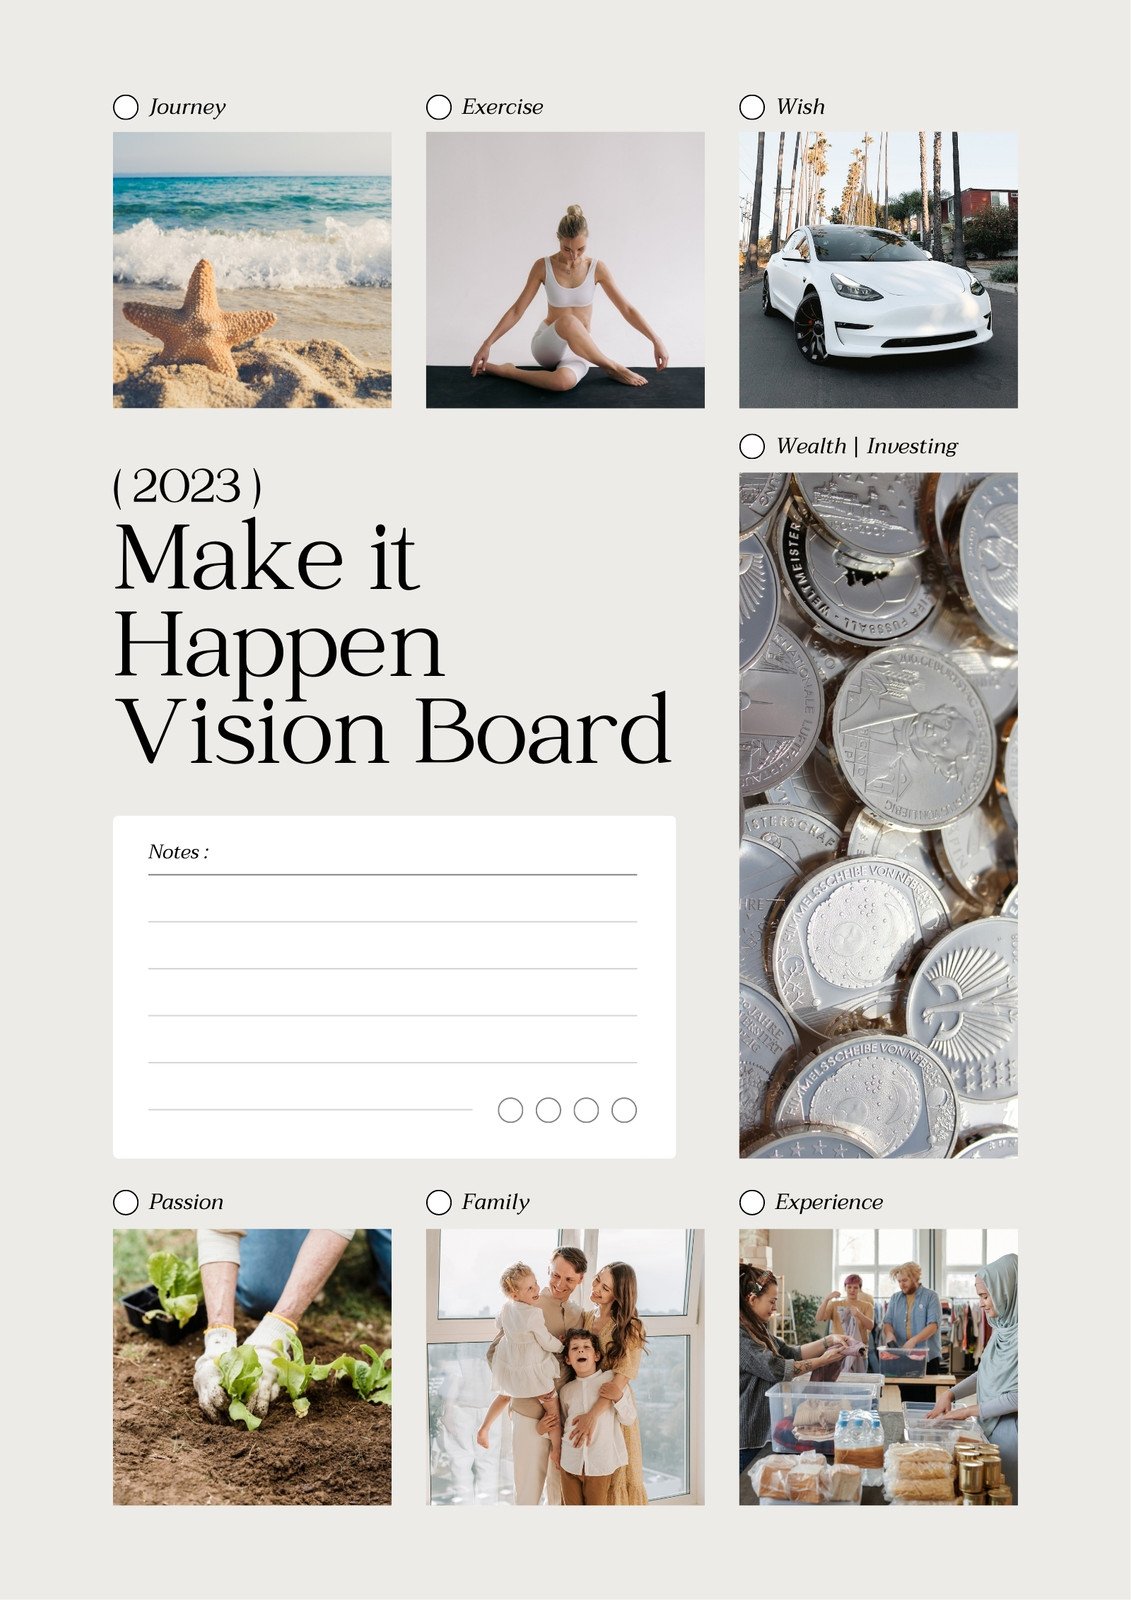 Vision Book Canva Template Journal Template Vision Book Vision Board Book  Write the Vision Journal 2023 Vision is Journal 